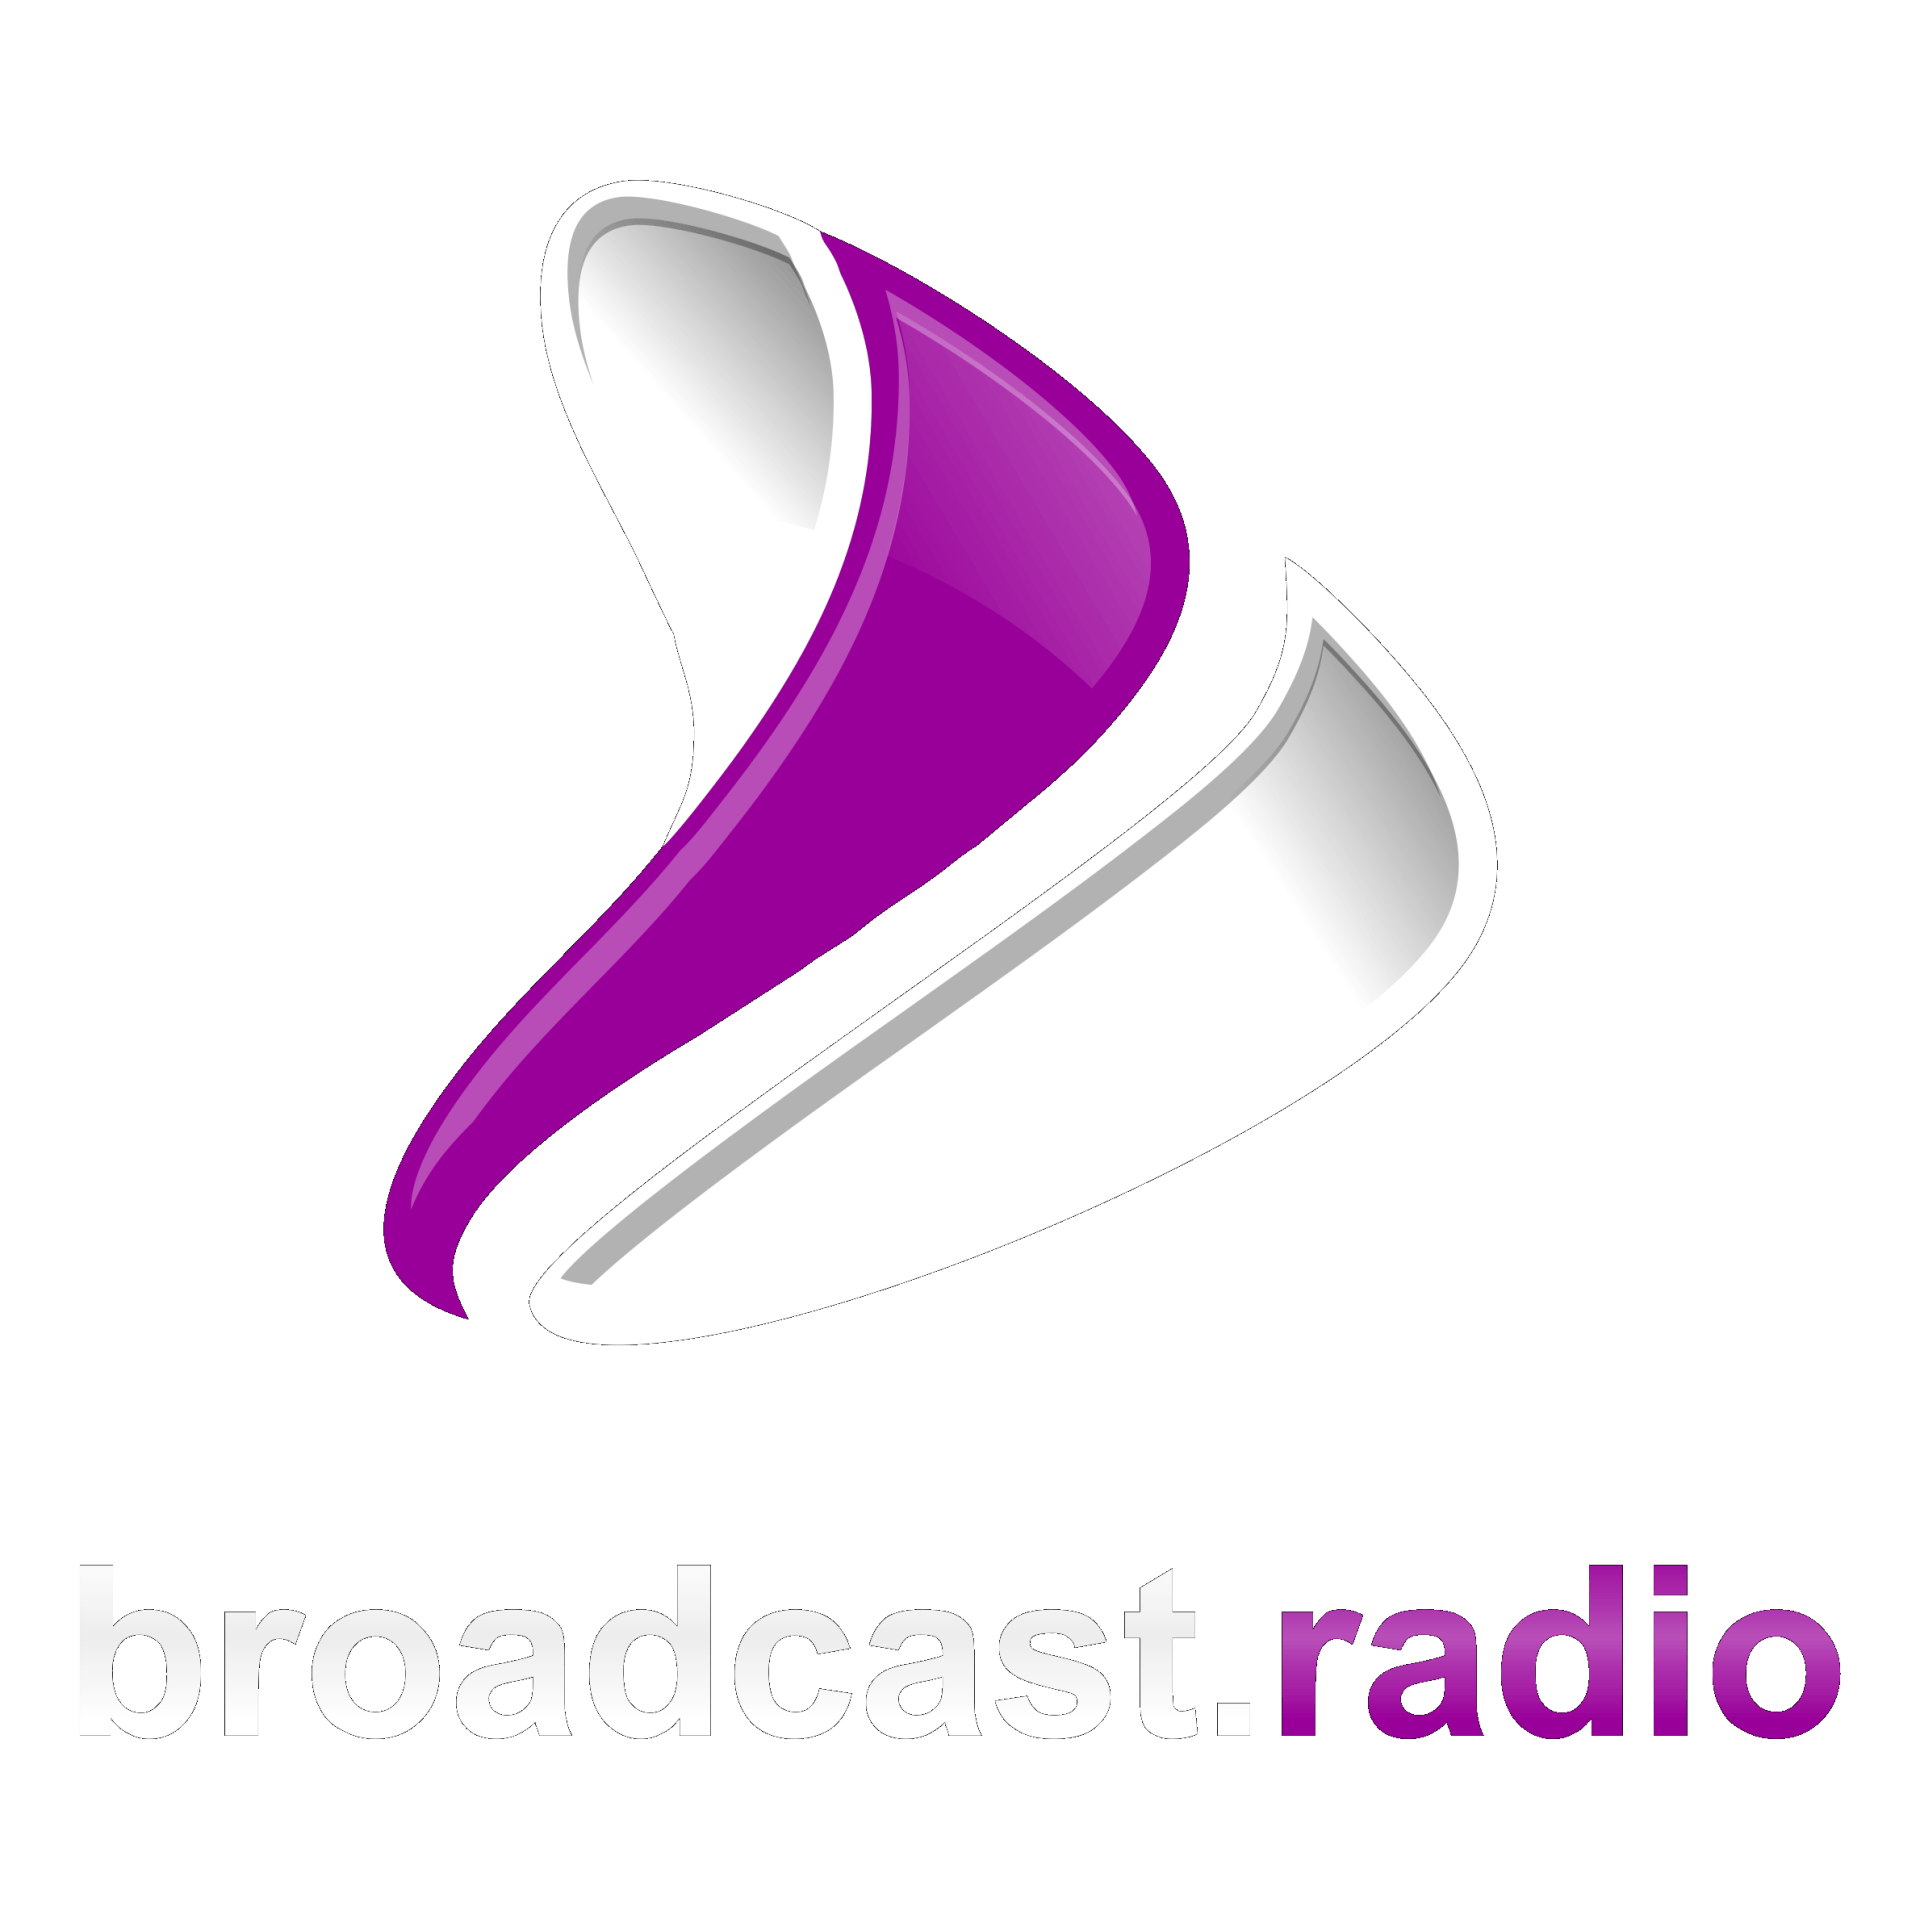 A purple and white logo for broadcast radio